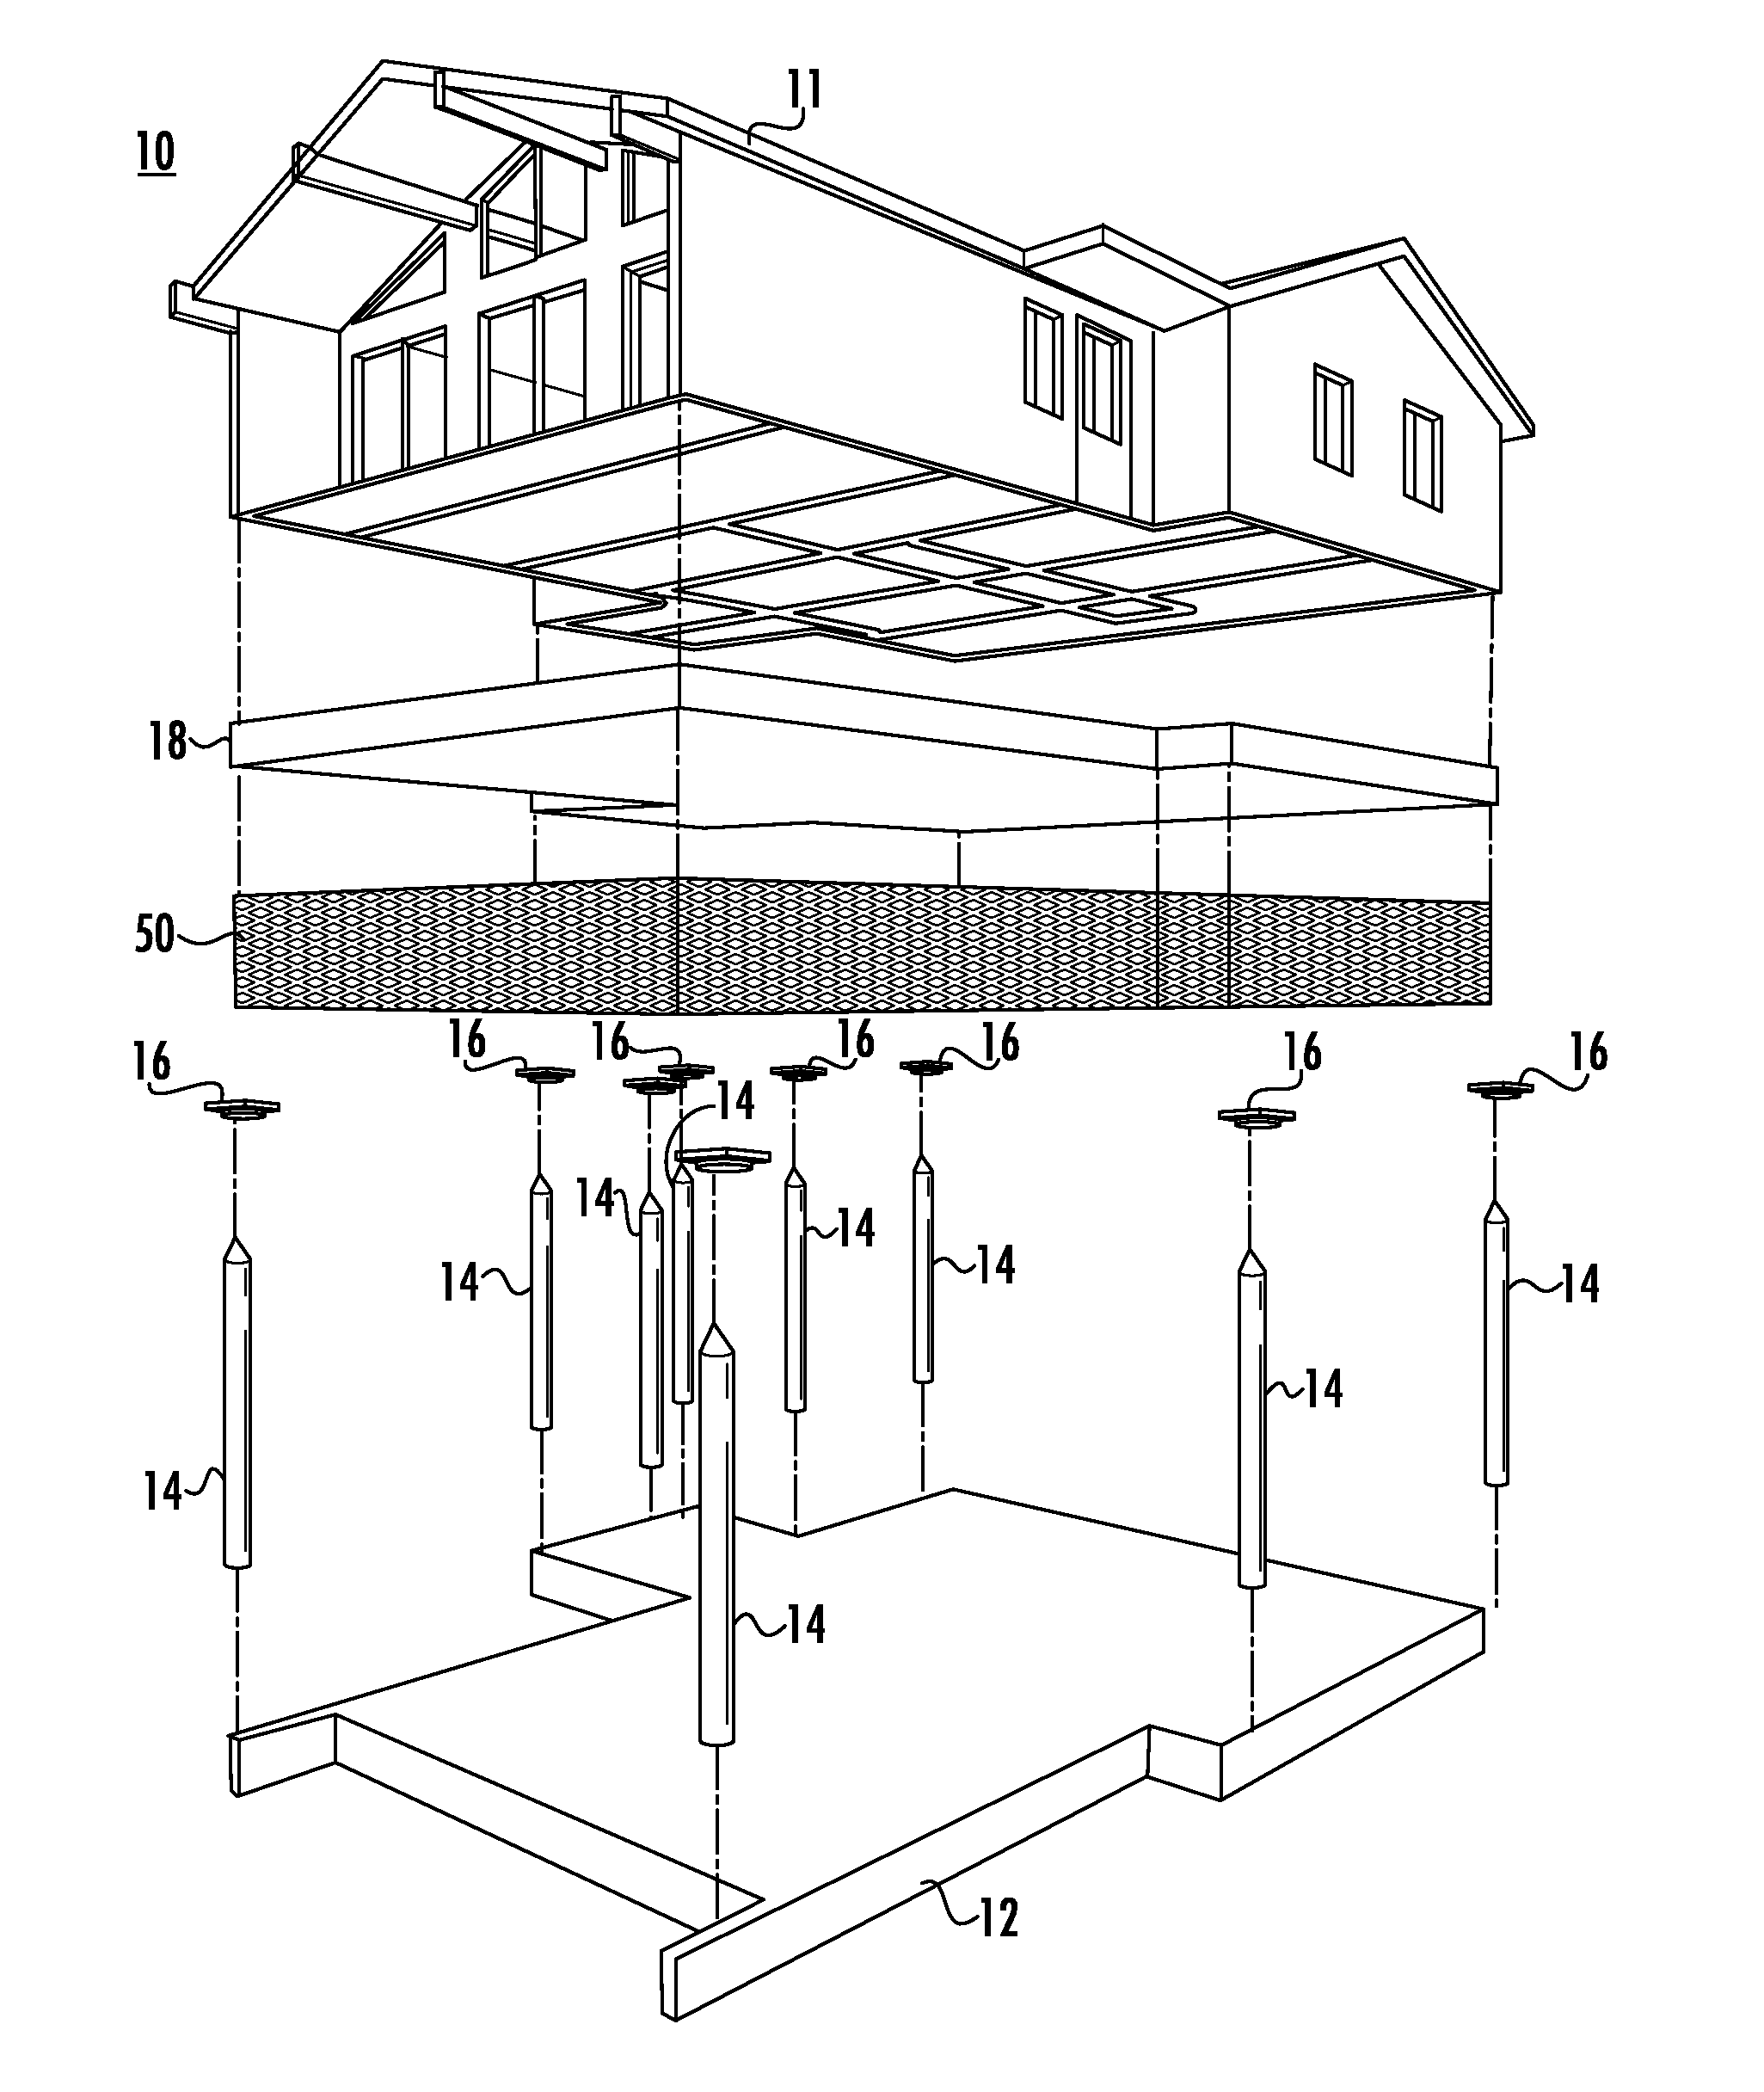 Method and system of raising an existing house in a flood or storm surge